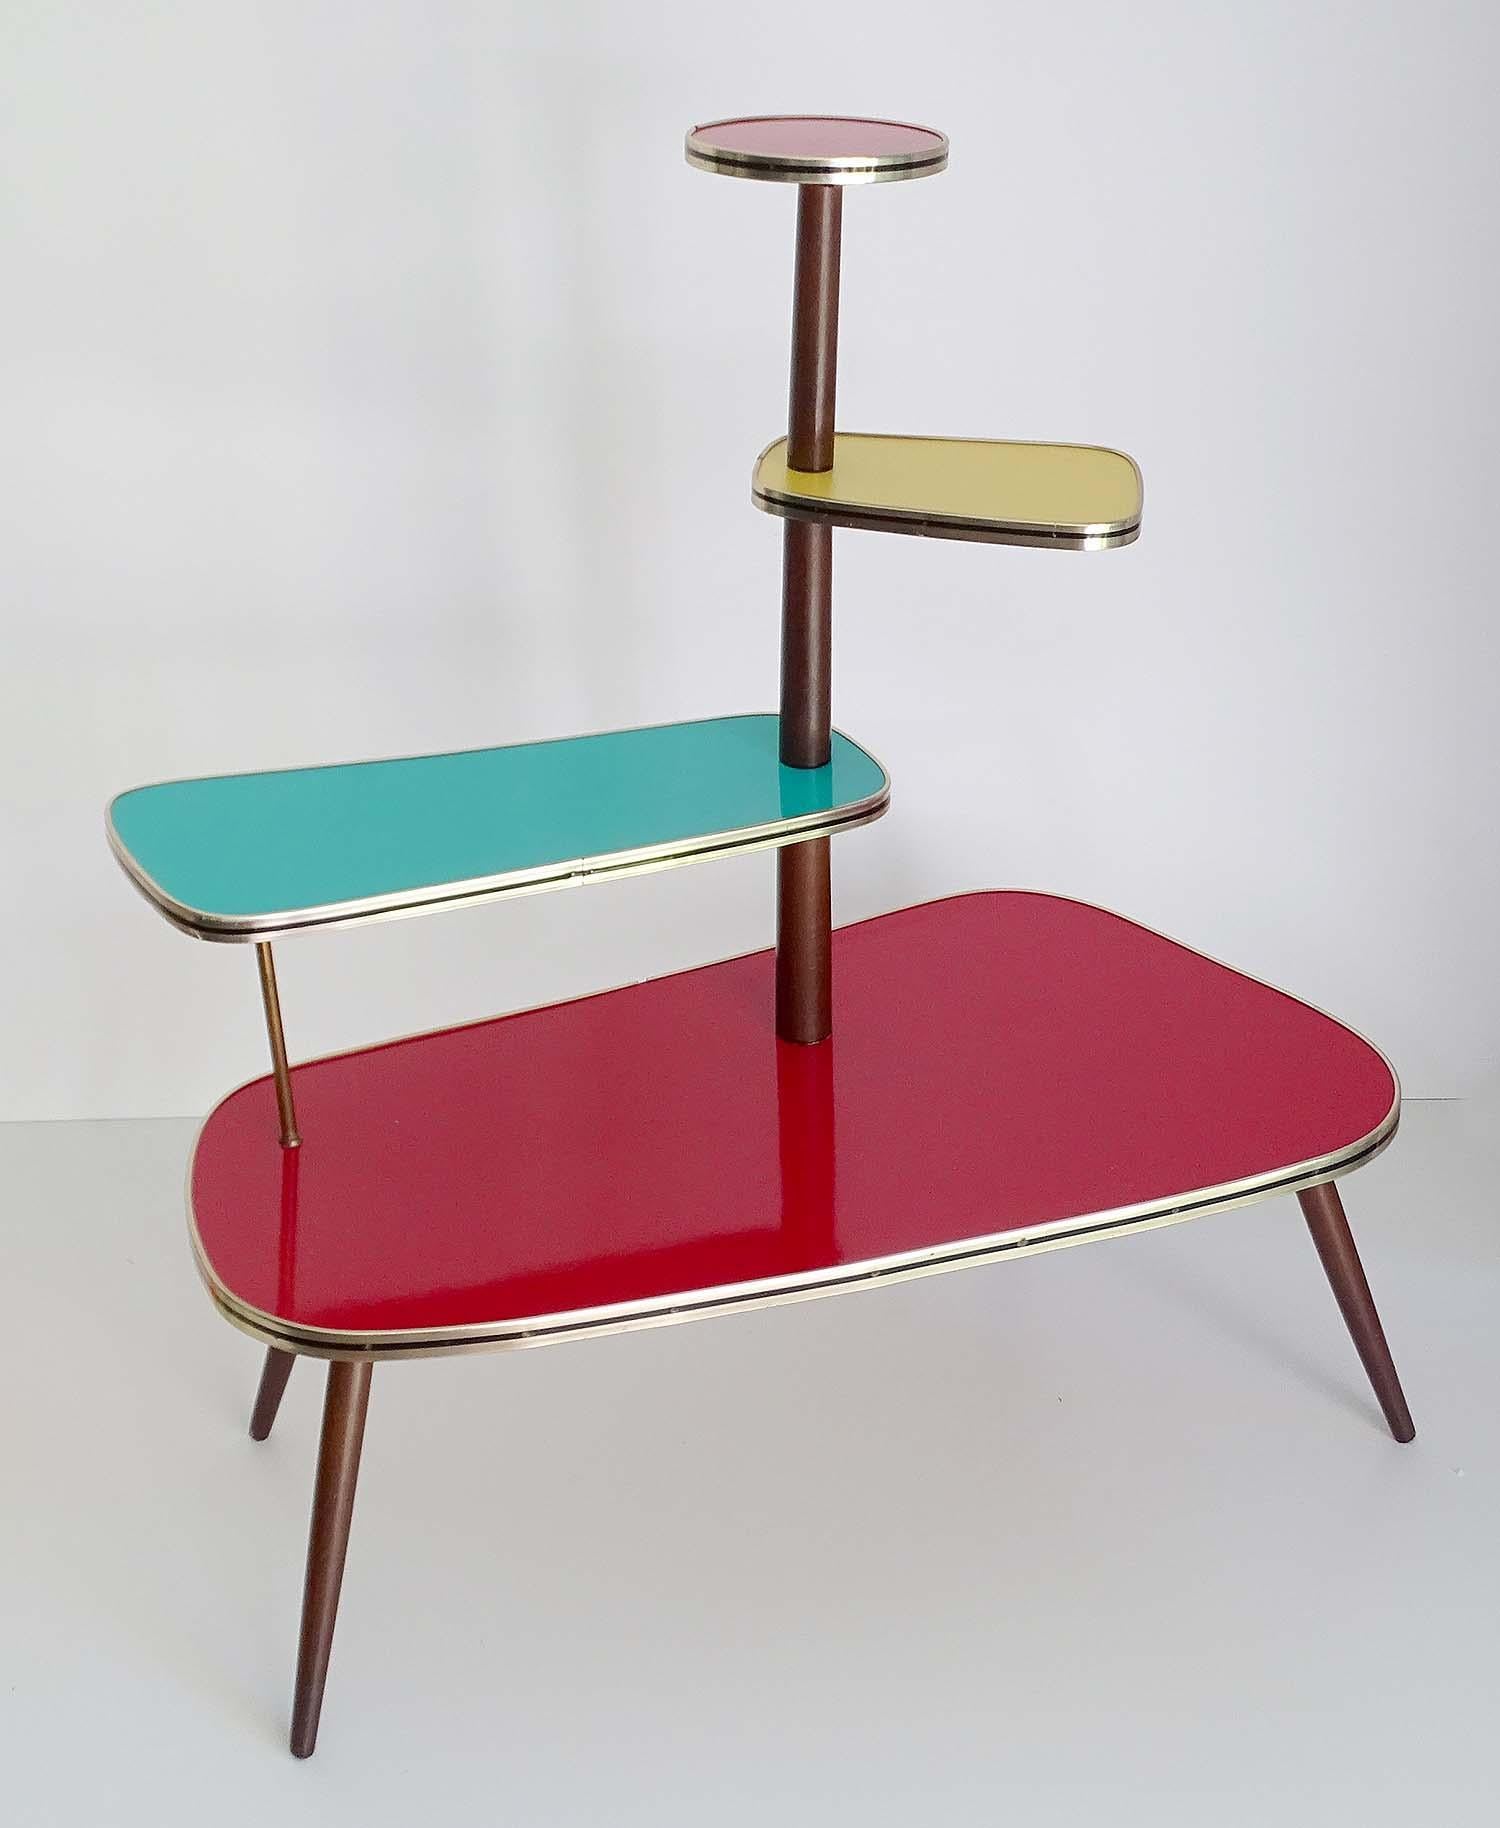 Stupendous large vintage tripod kidney Mid-Century Modern 1950s-1960s flower / plant stand 
A multilevel colored flower table/plant stand, it has 1 great plate and 3 smaller plates, made out
of wood with a bright colored laminate and brass / black